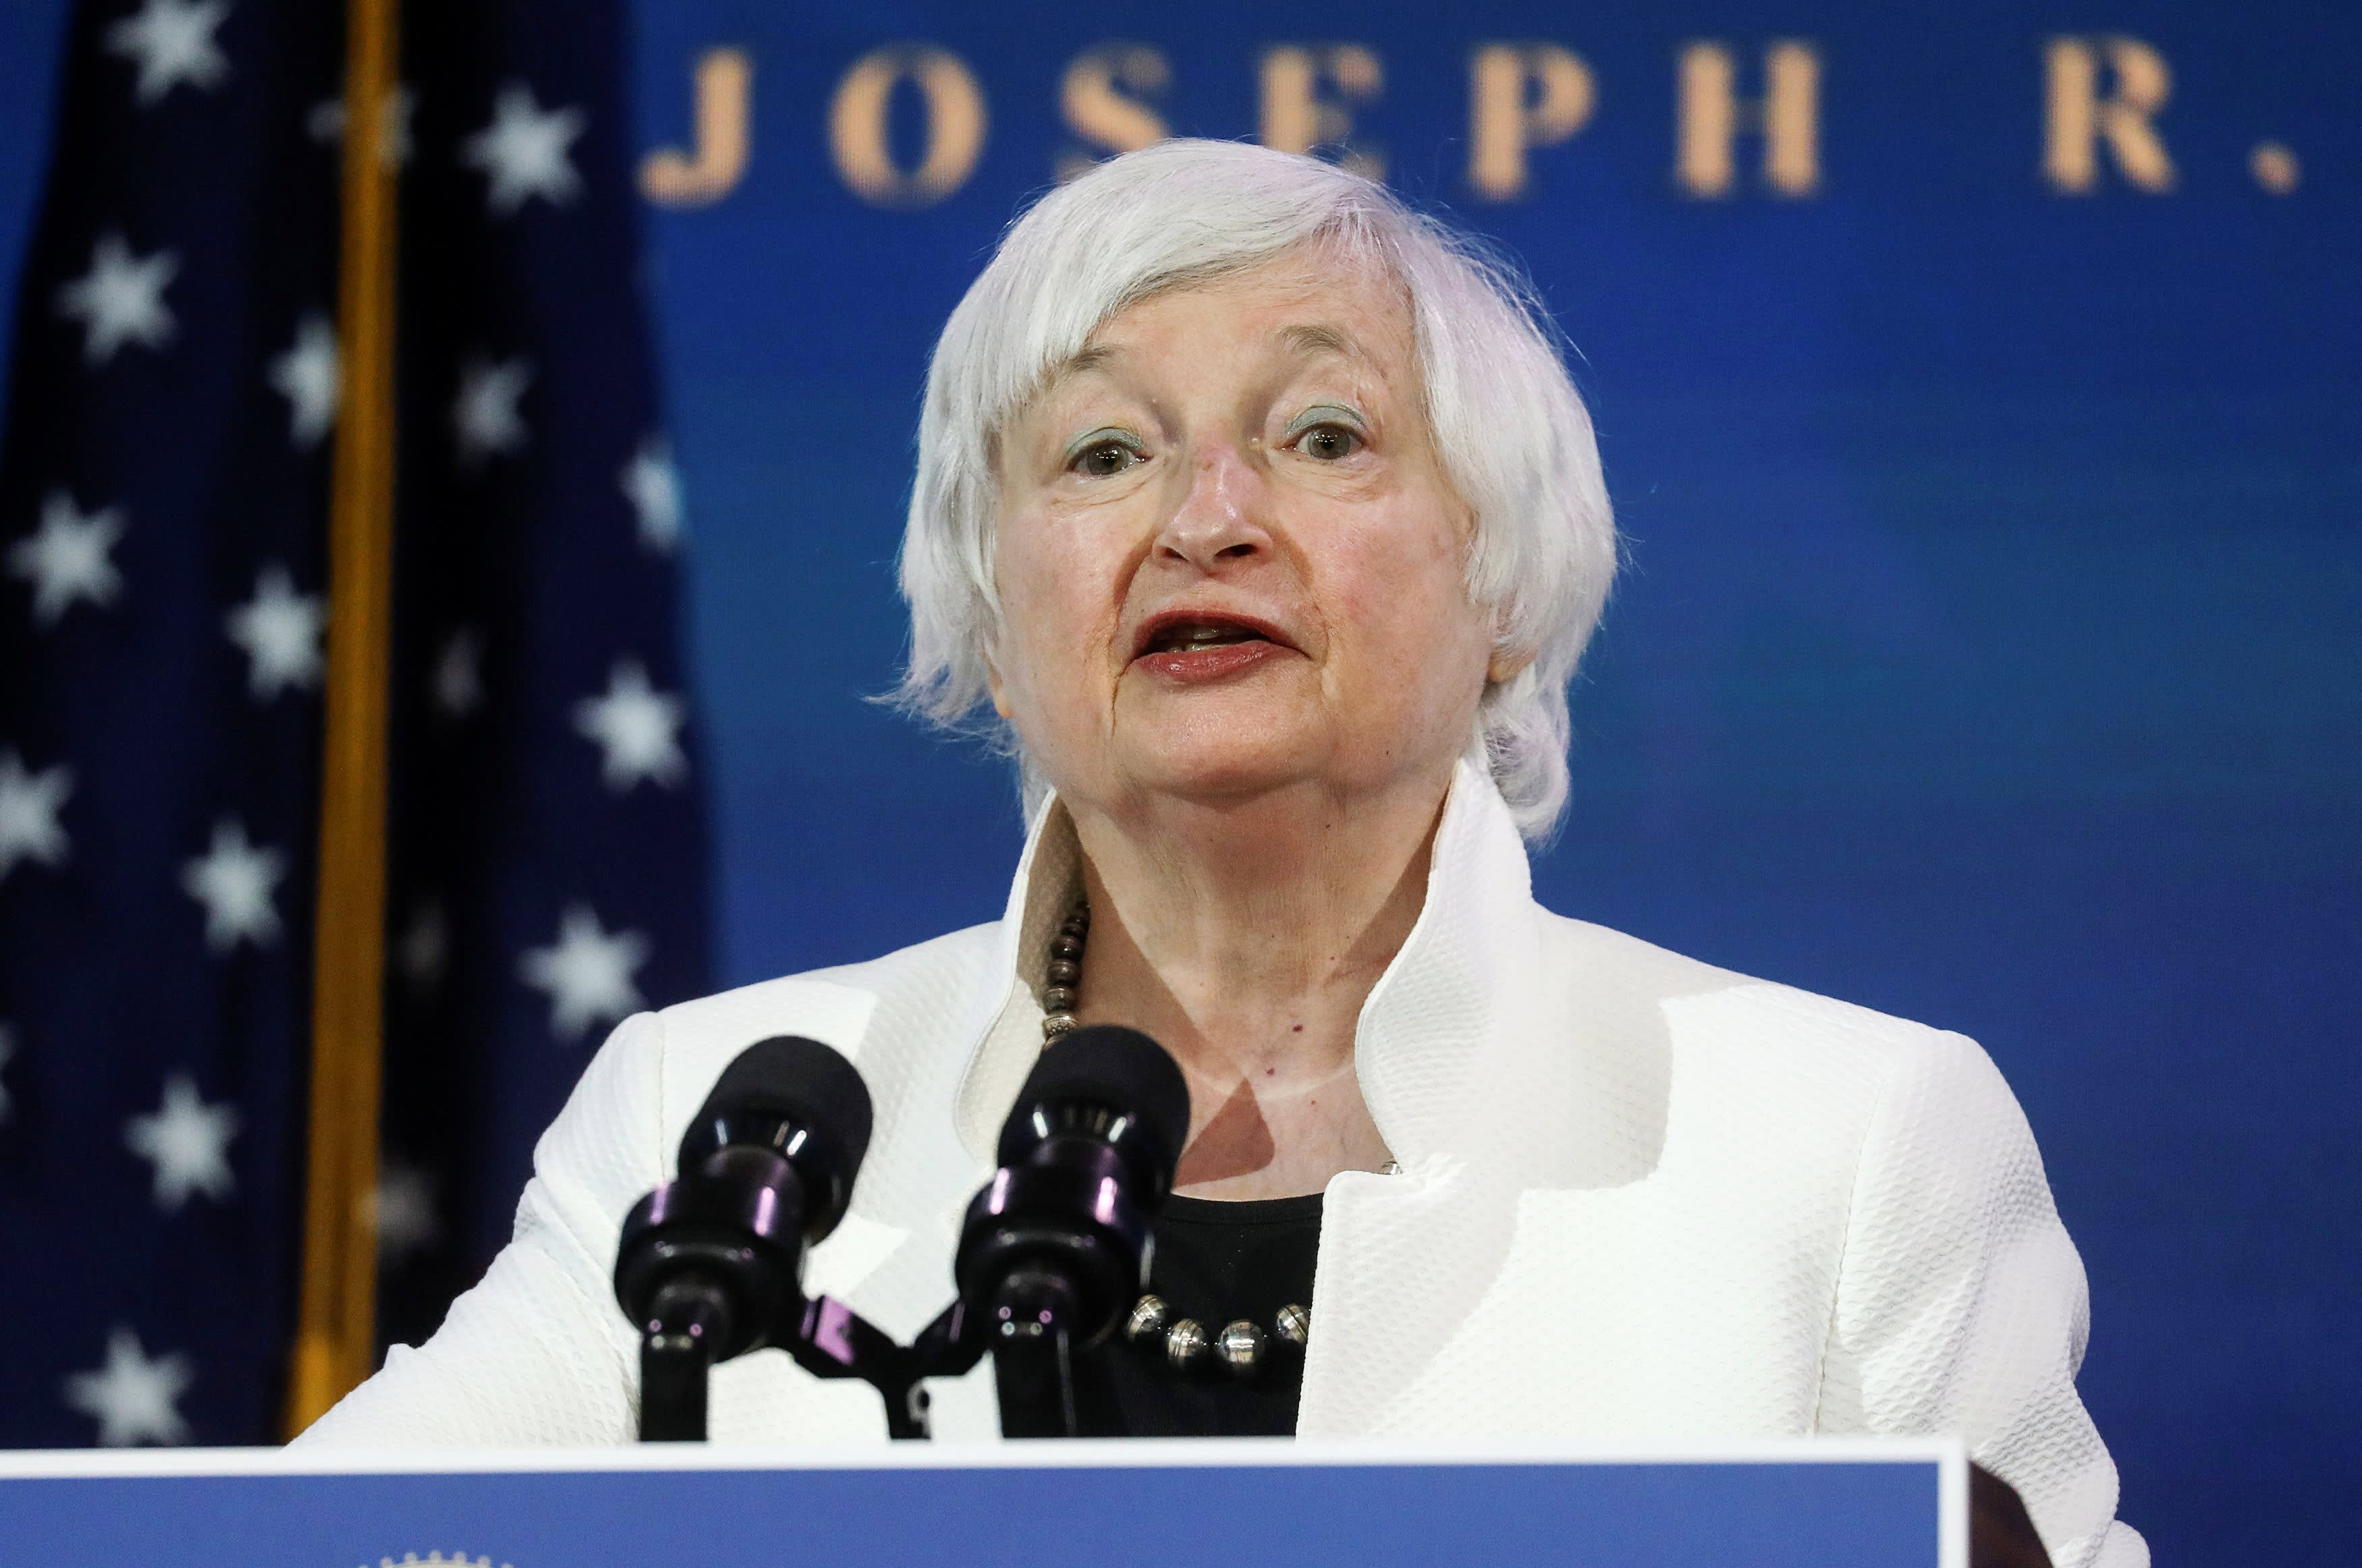 Yellen says Fed has no authority on bitcoin issues | The Straits Times